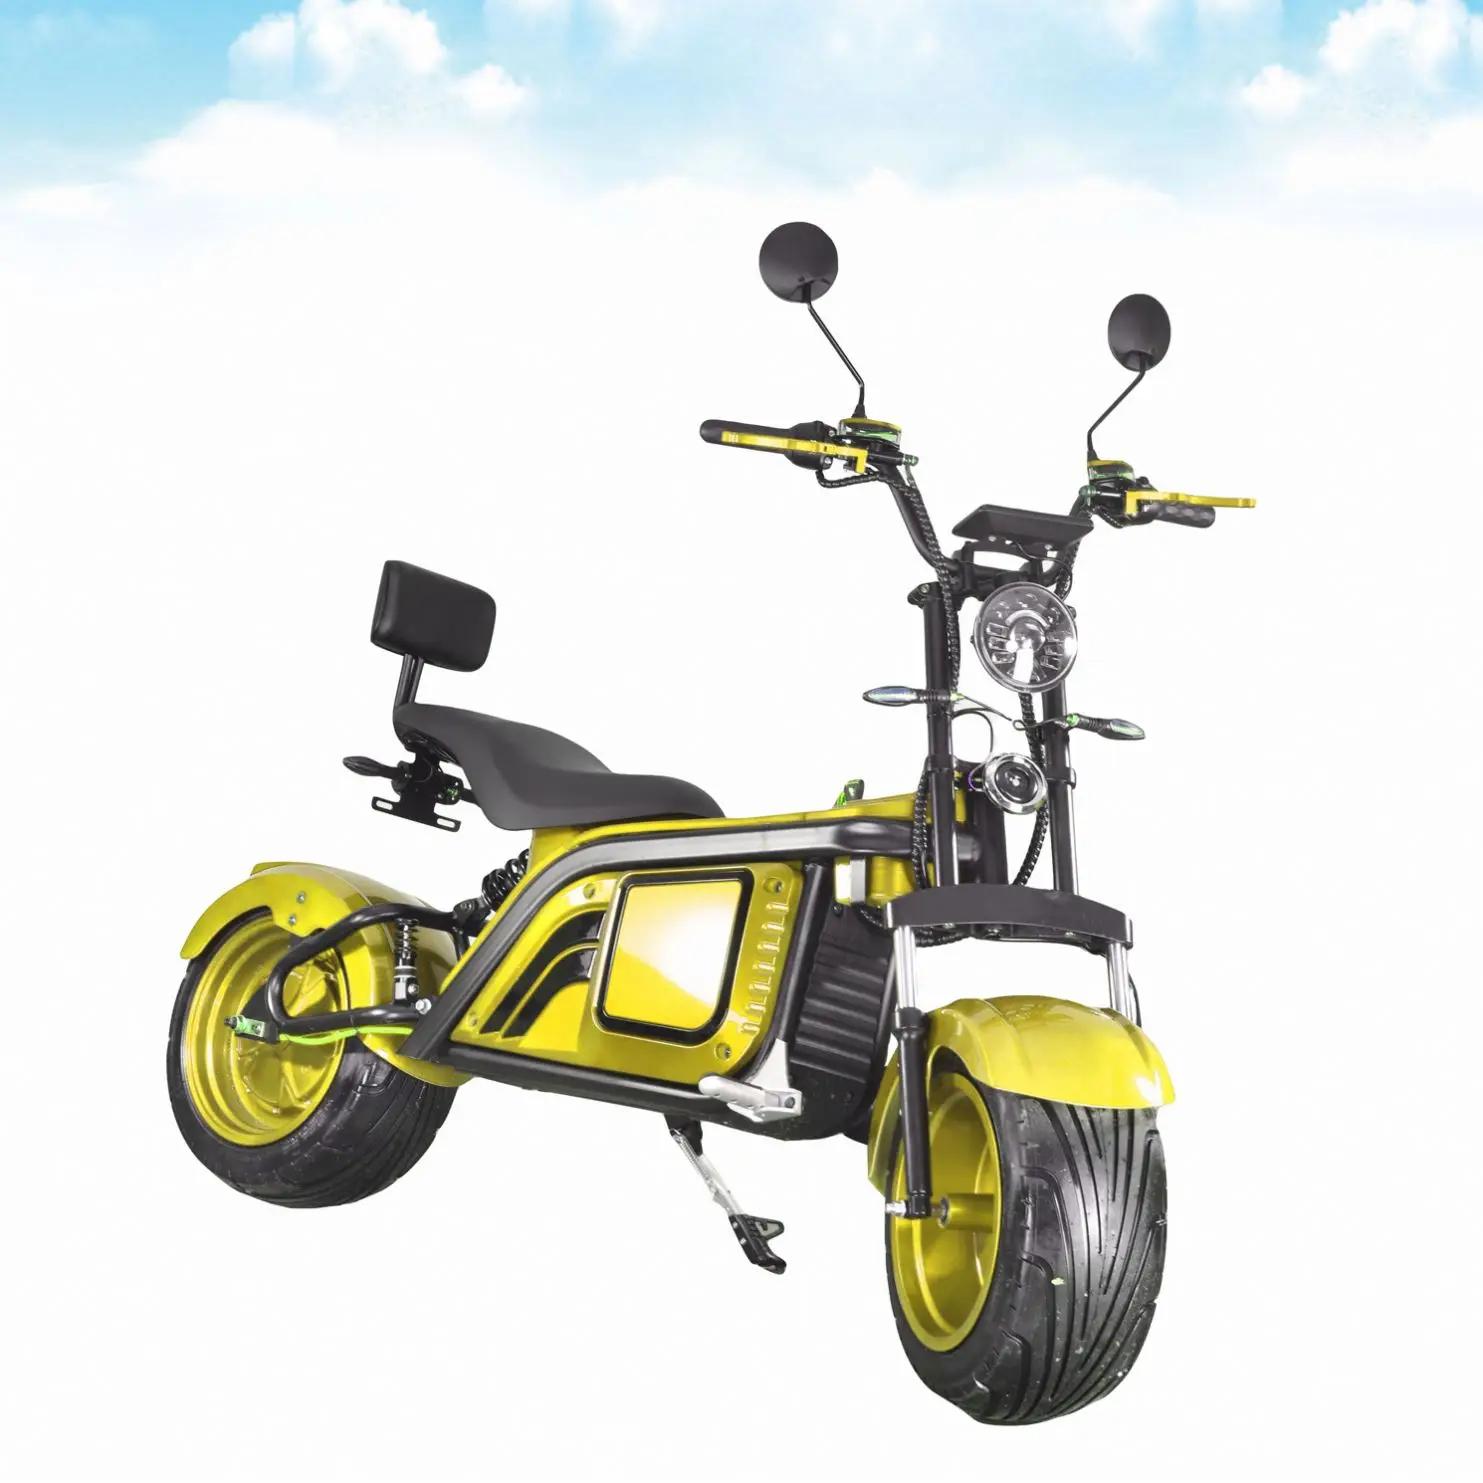 

YIDE X4 EEC COC Electric Lithium Battery 3000W 2000Watt Fat Tire City Coco Electric Scooter Xecuter Sx Trottinette Electrique